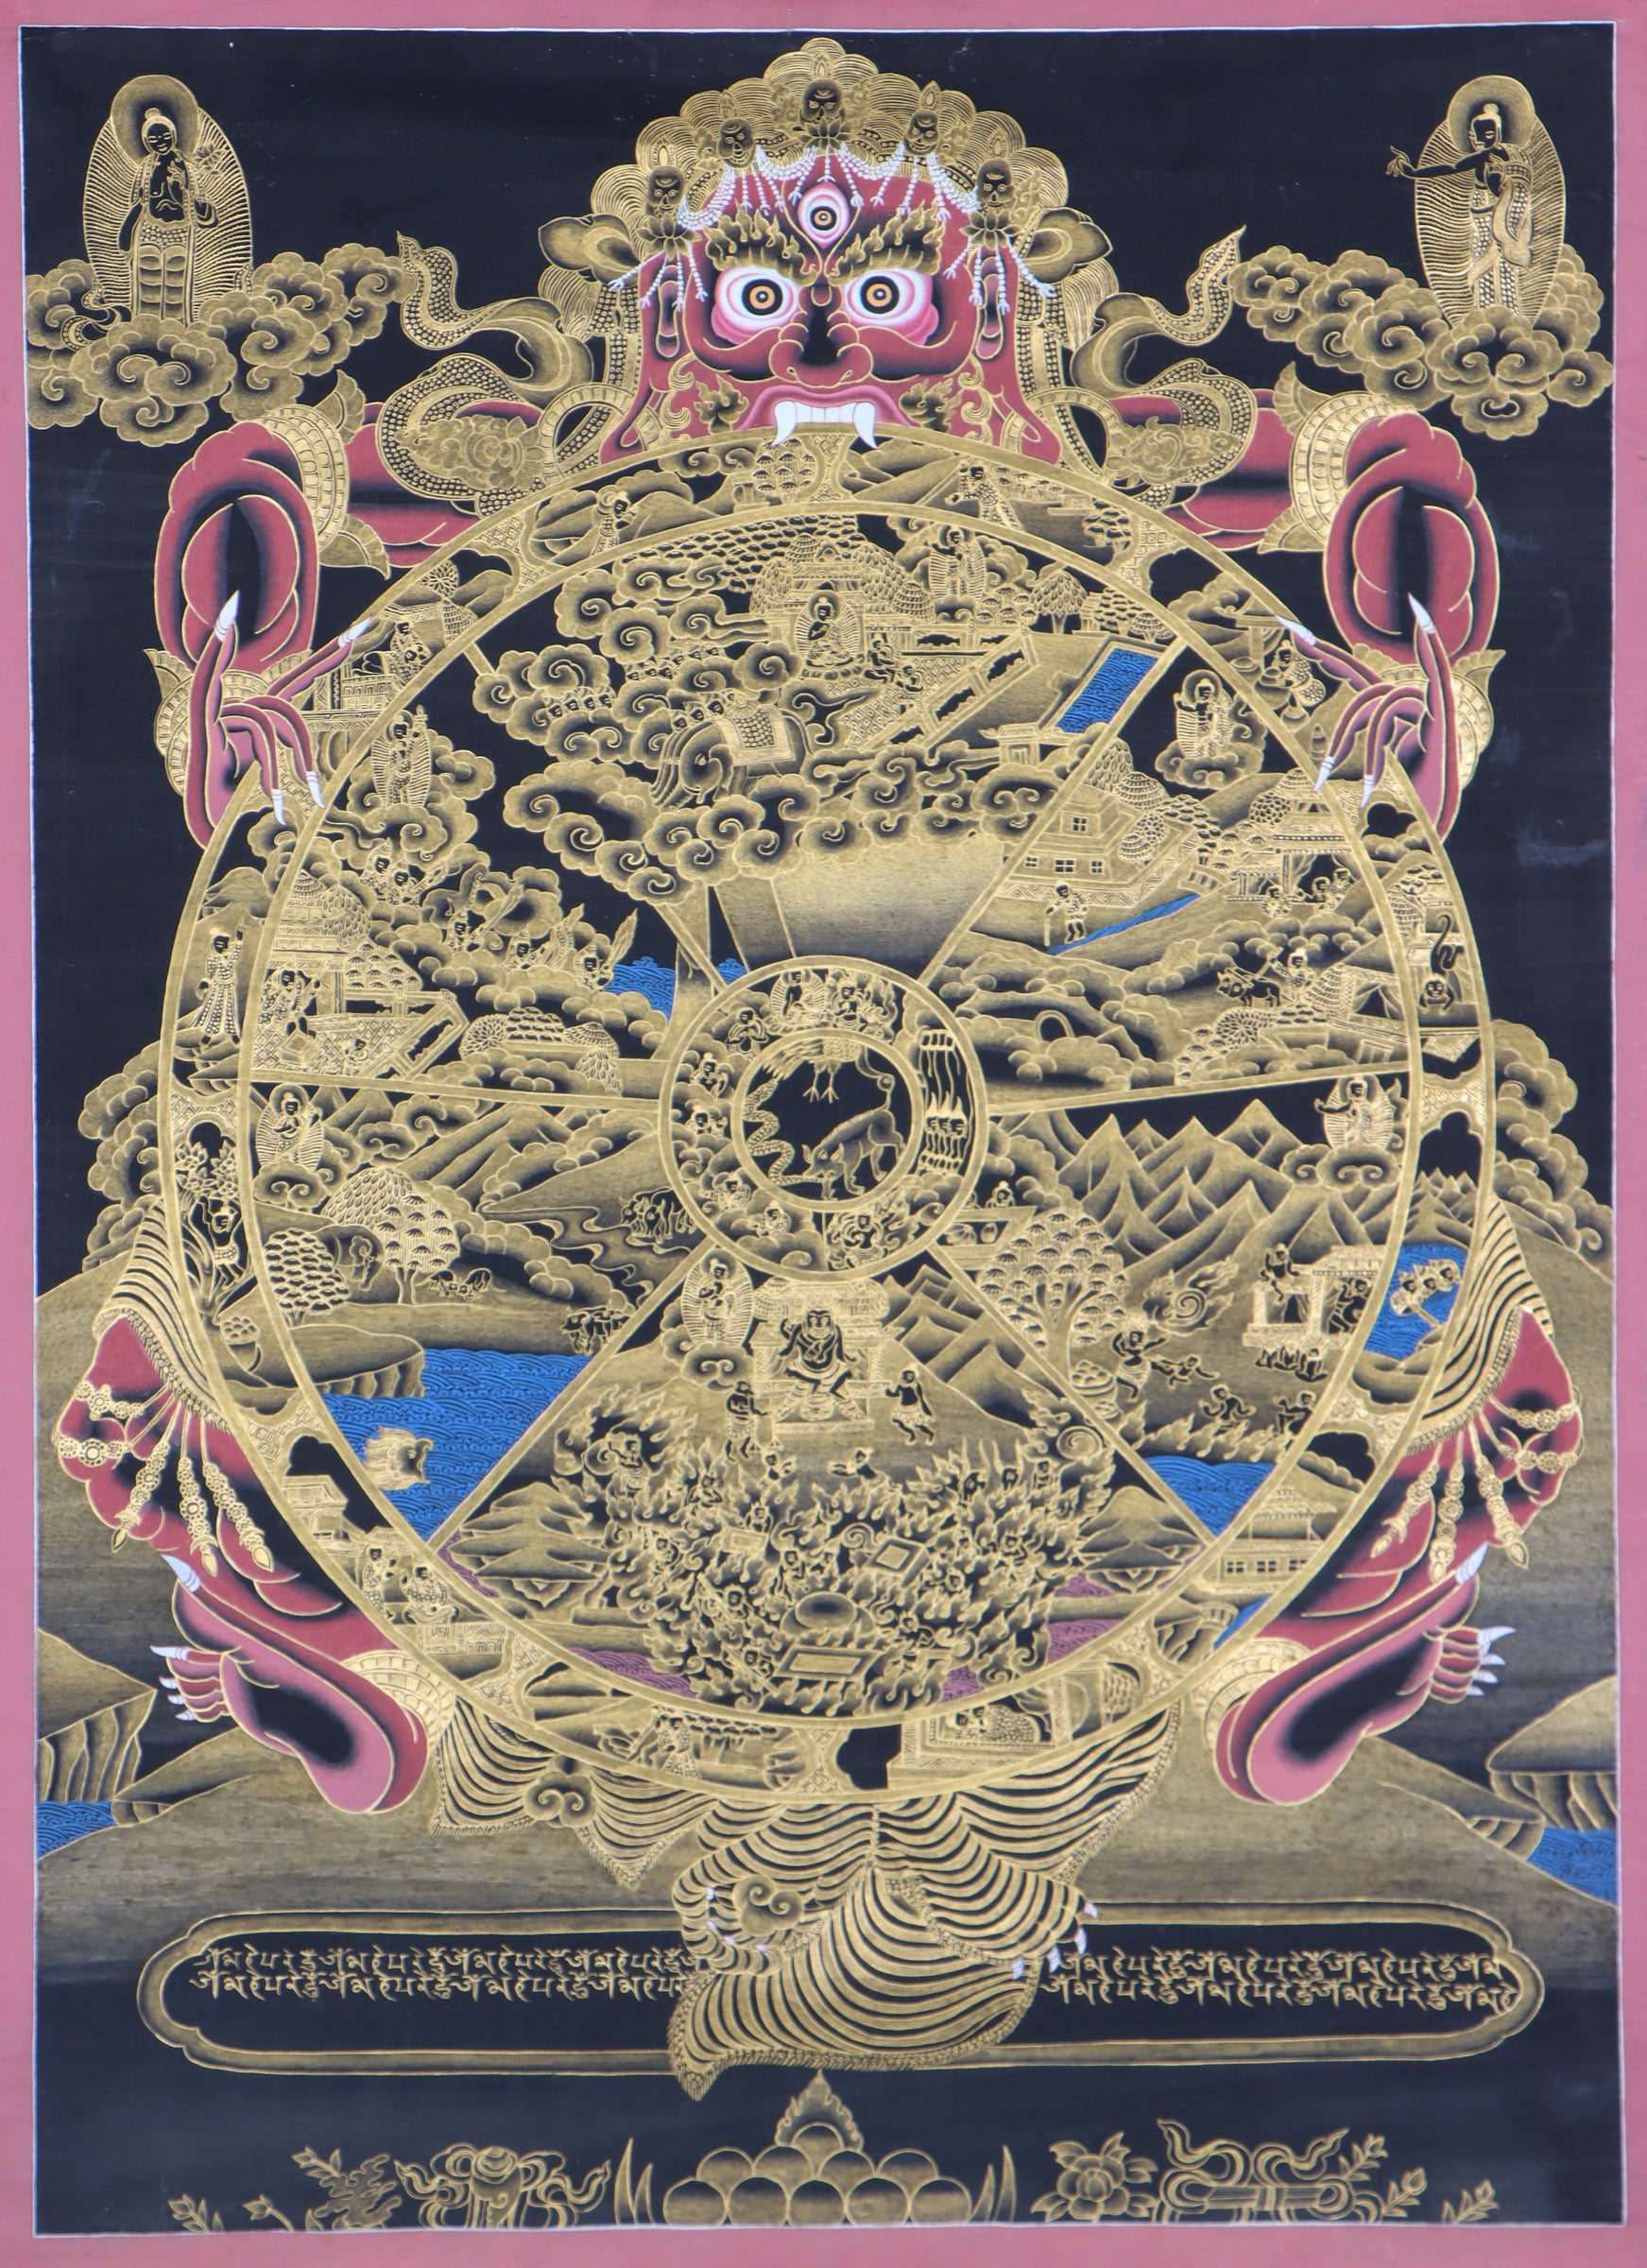 Wheel of life thangka for for aiding meditation and self-reflection on the road to enlightenment.